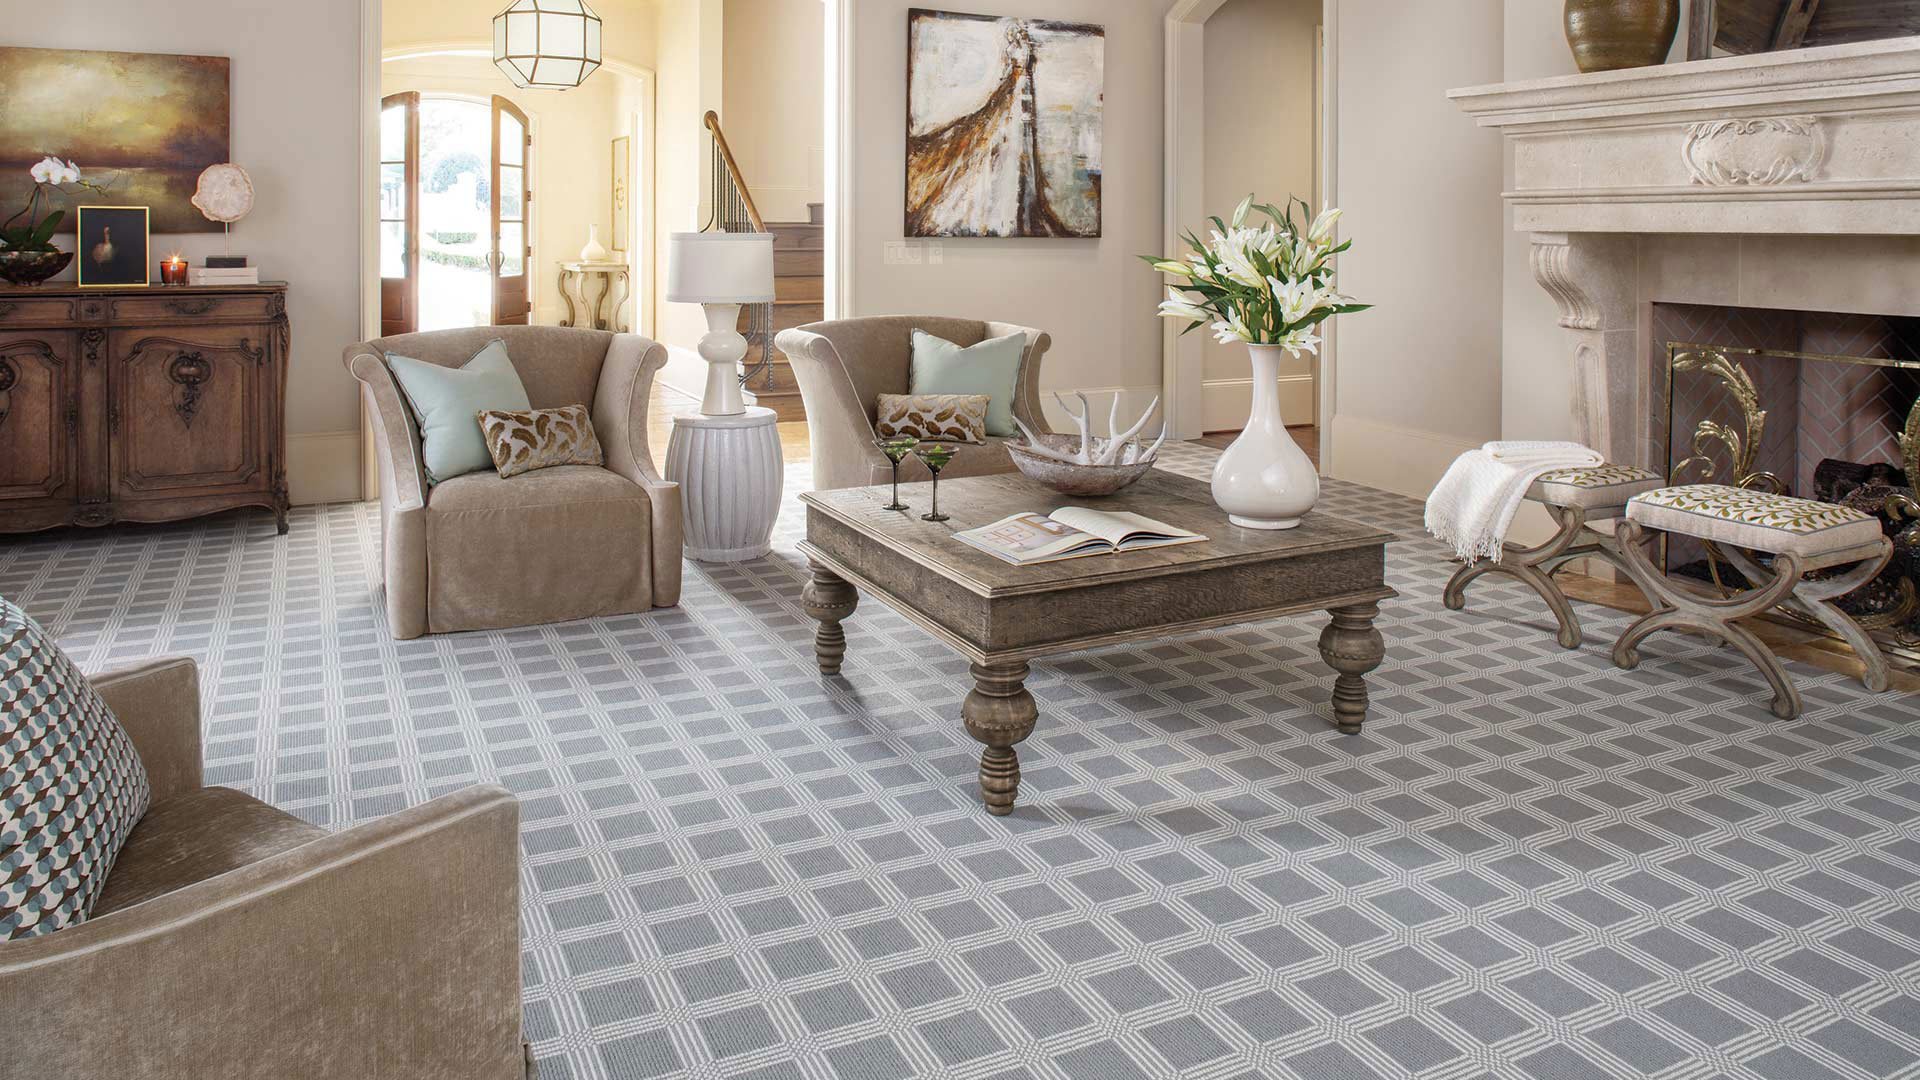 Carpets of Dalton Furniture: Elevating Home Interiors with Style插图3